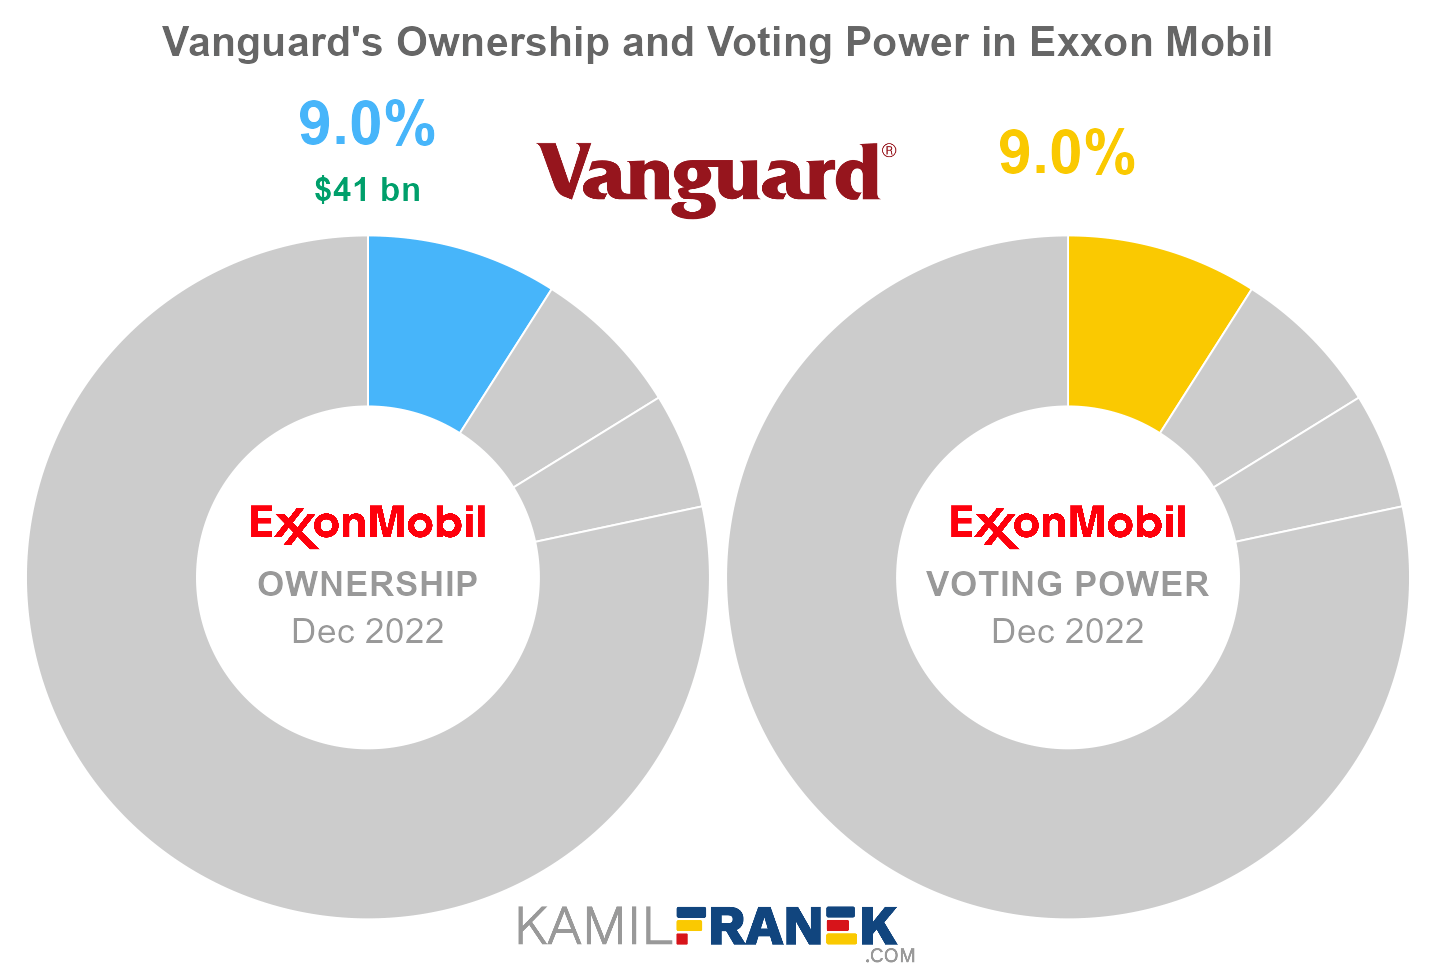 Vanguard's share ownership and voting power in Exxon Mobil (chart)